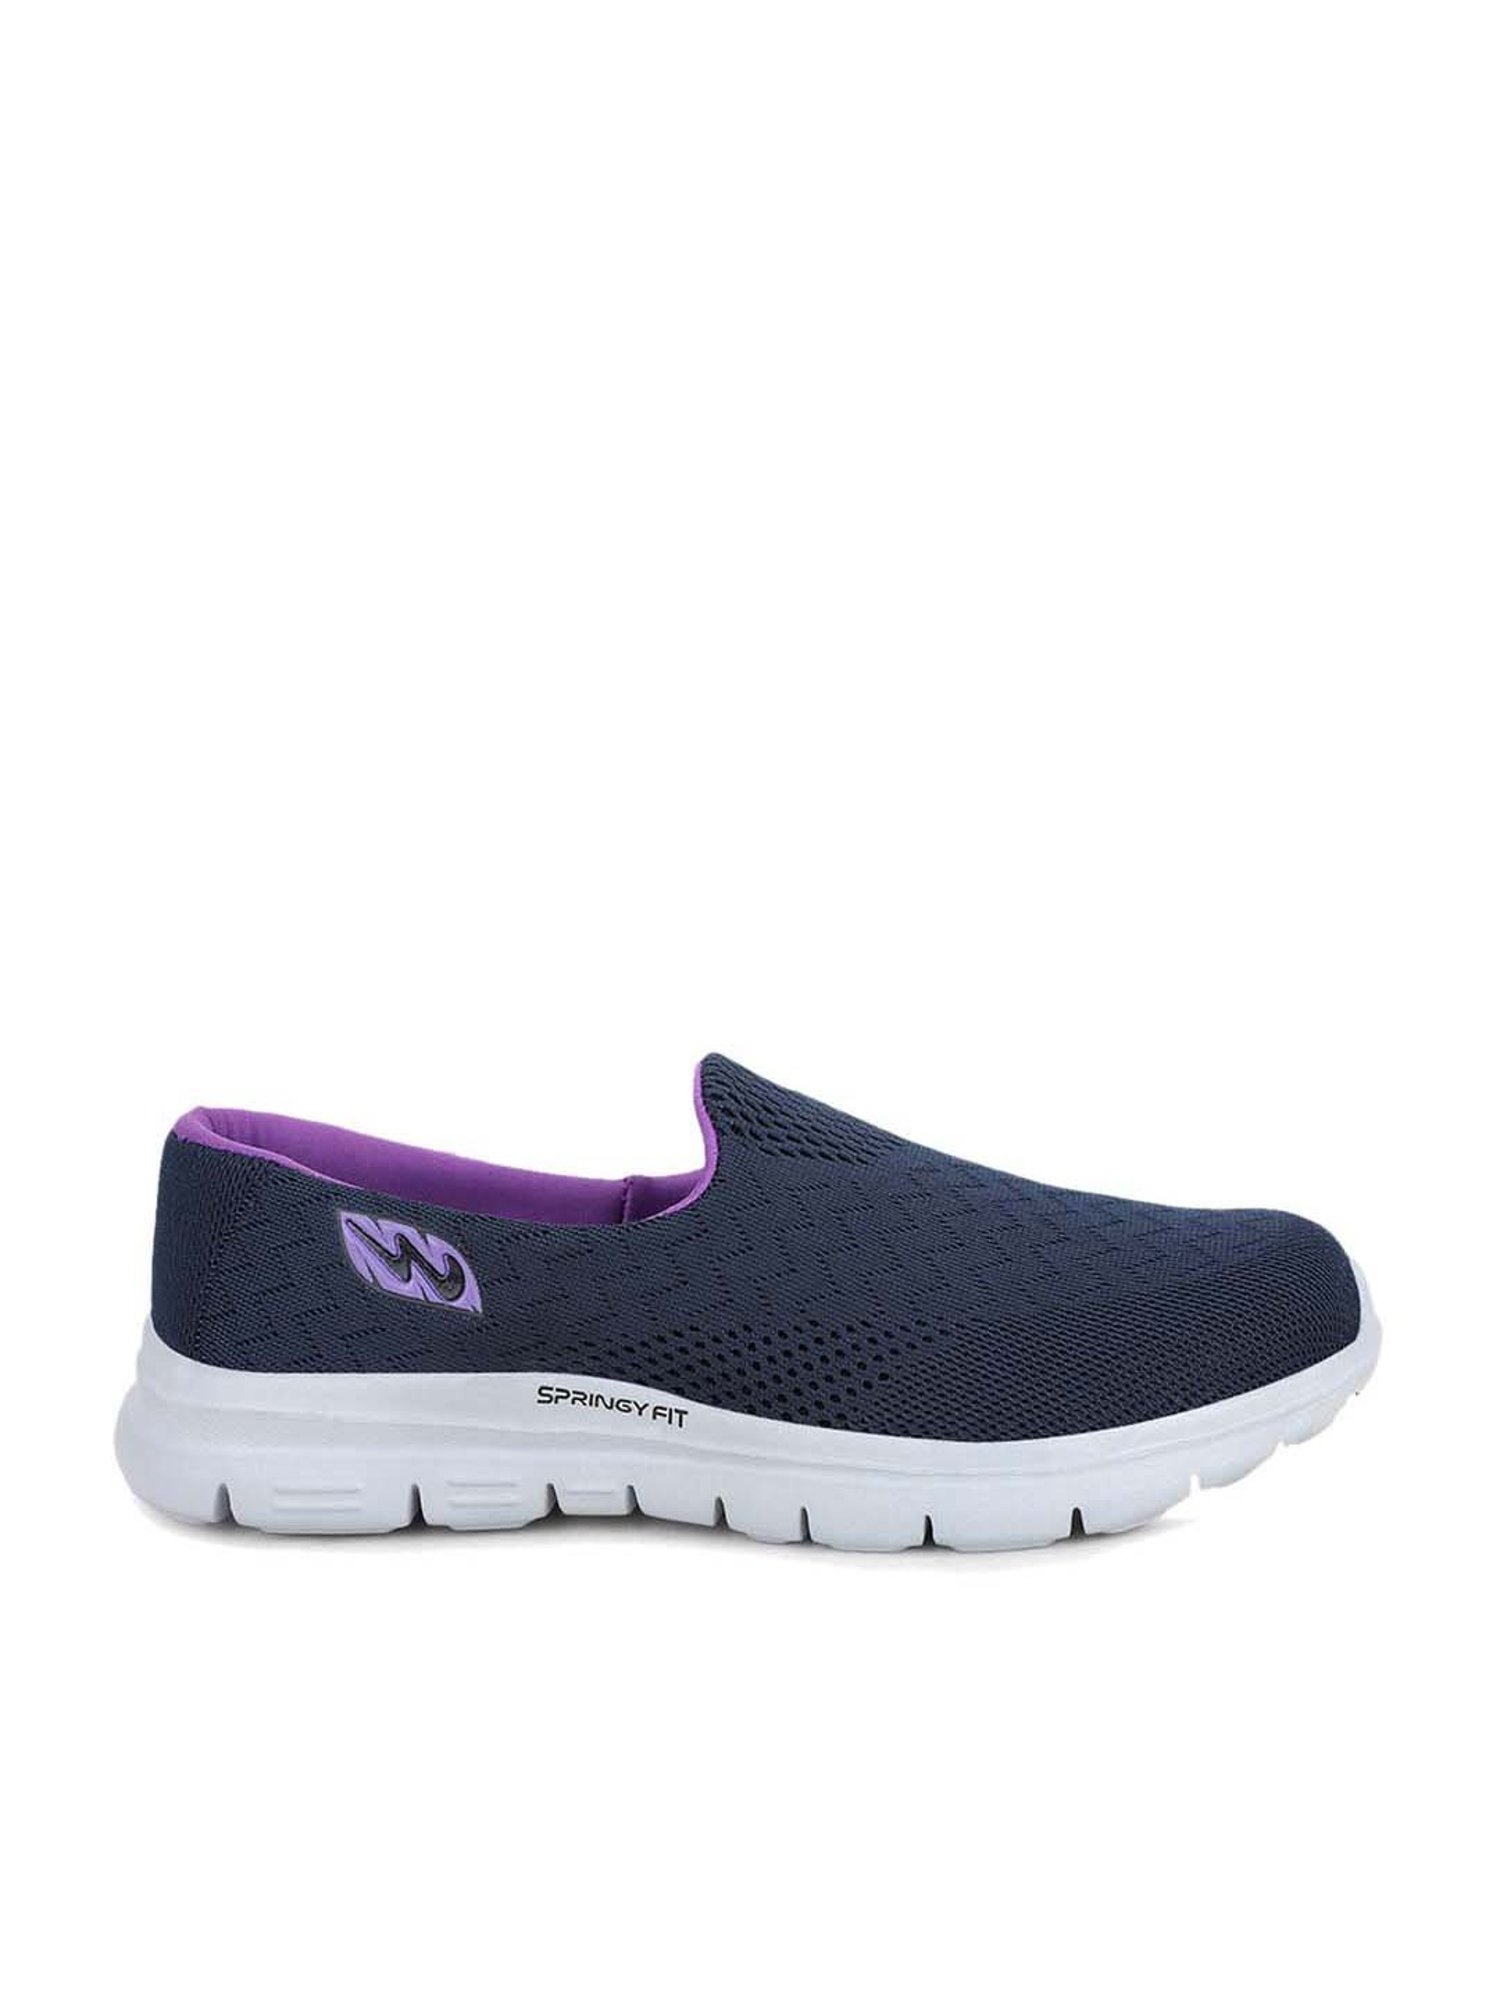 Buy Campus Women's Bliss Black Running Shoes for Women at Best Price @ Tata  CLiQ